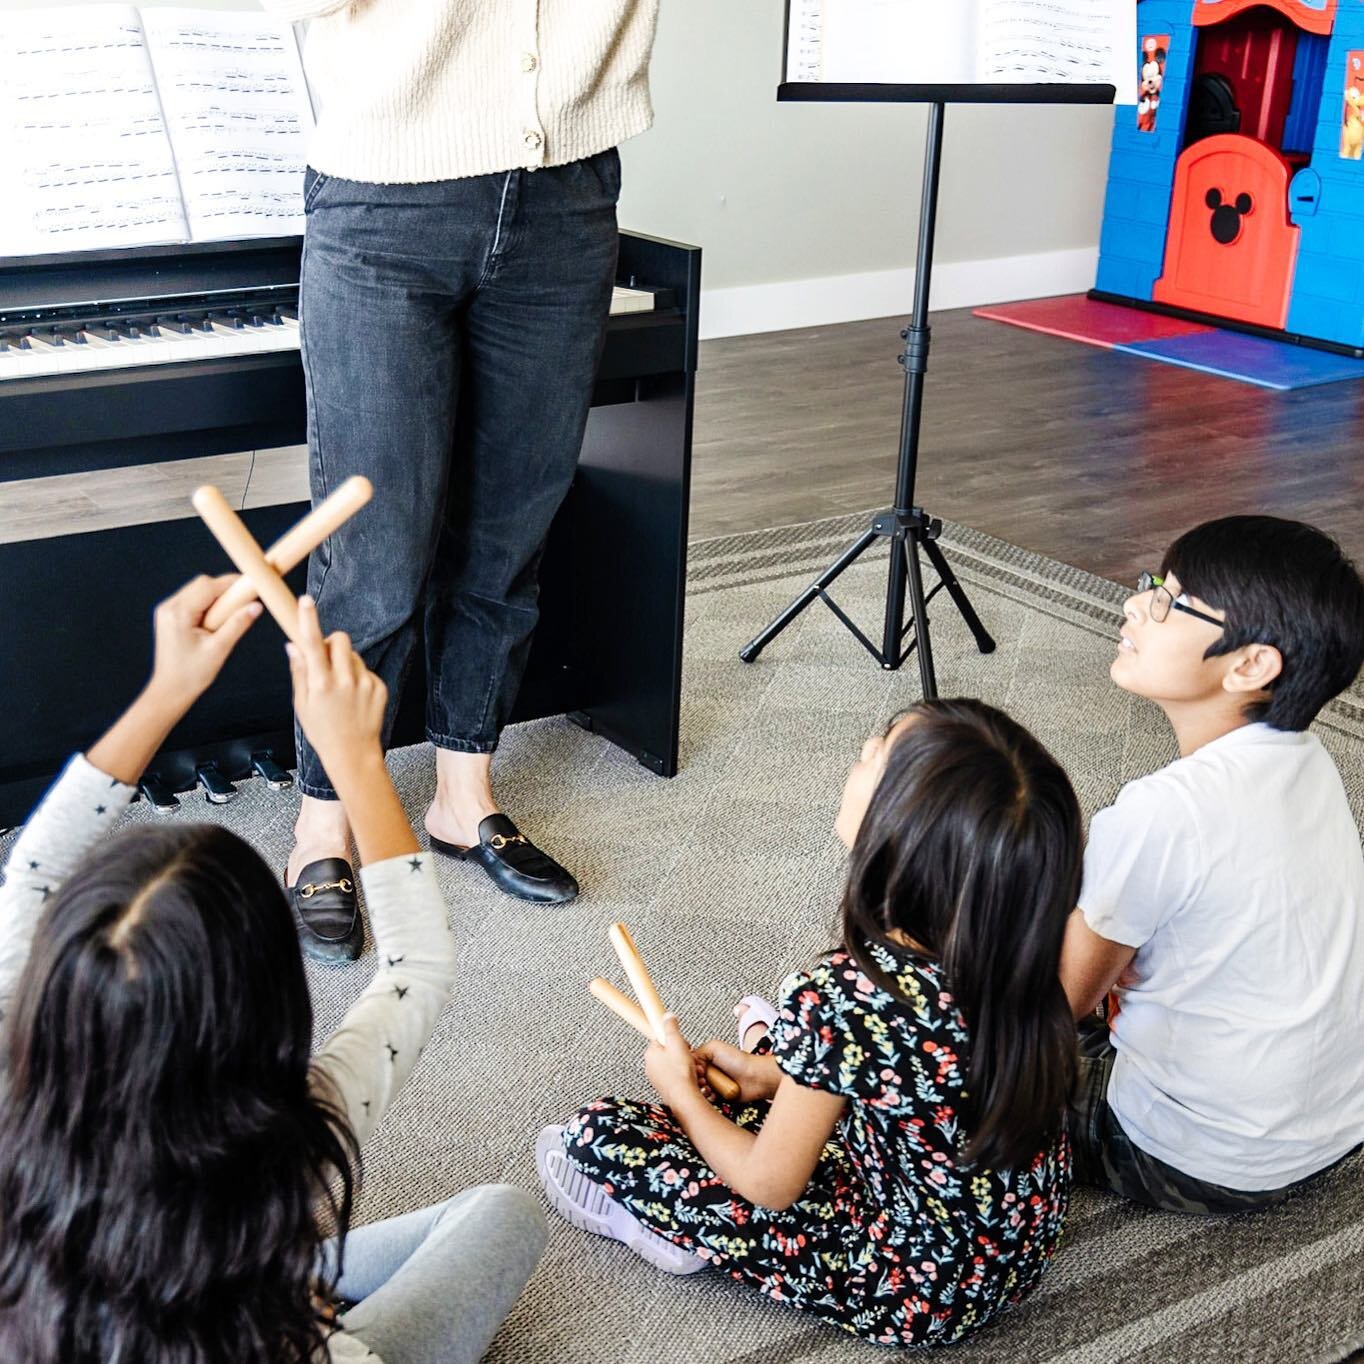 Our summer classes are starting&hellip; if you haven&rsquo;t checked them out online - please do as we have a few spots still available!!

Music Summer Sampler for ages 3 - 8 years old is a fun hands-on class, an interactive way to introduce kids to 